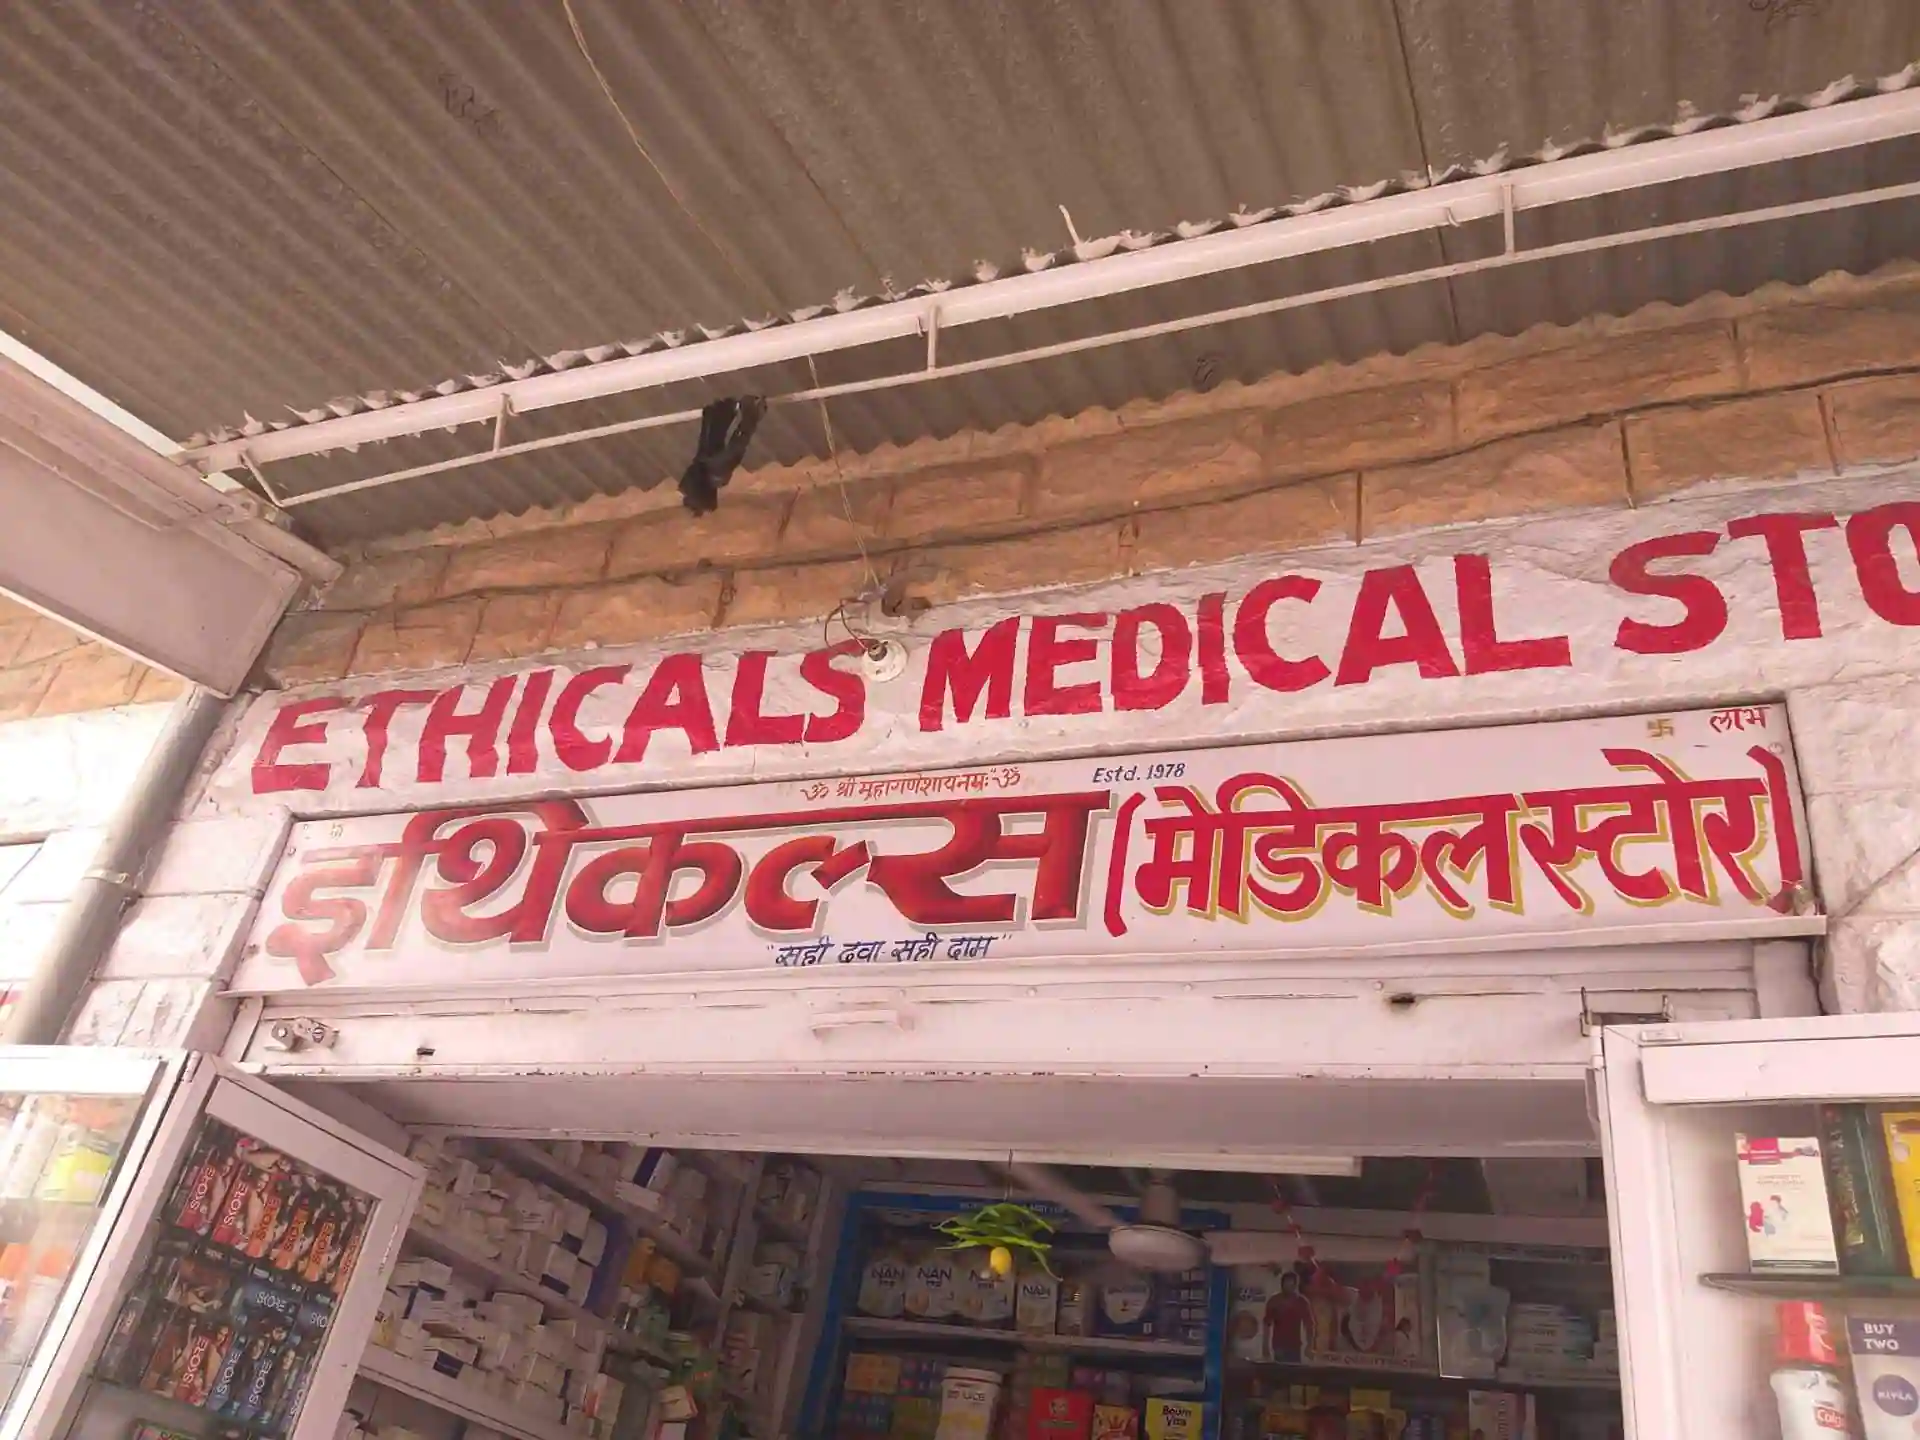 Ethicals Medical Store